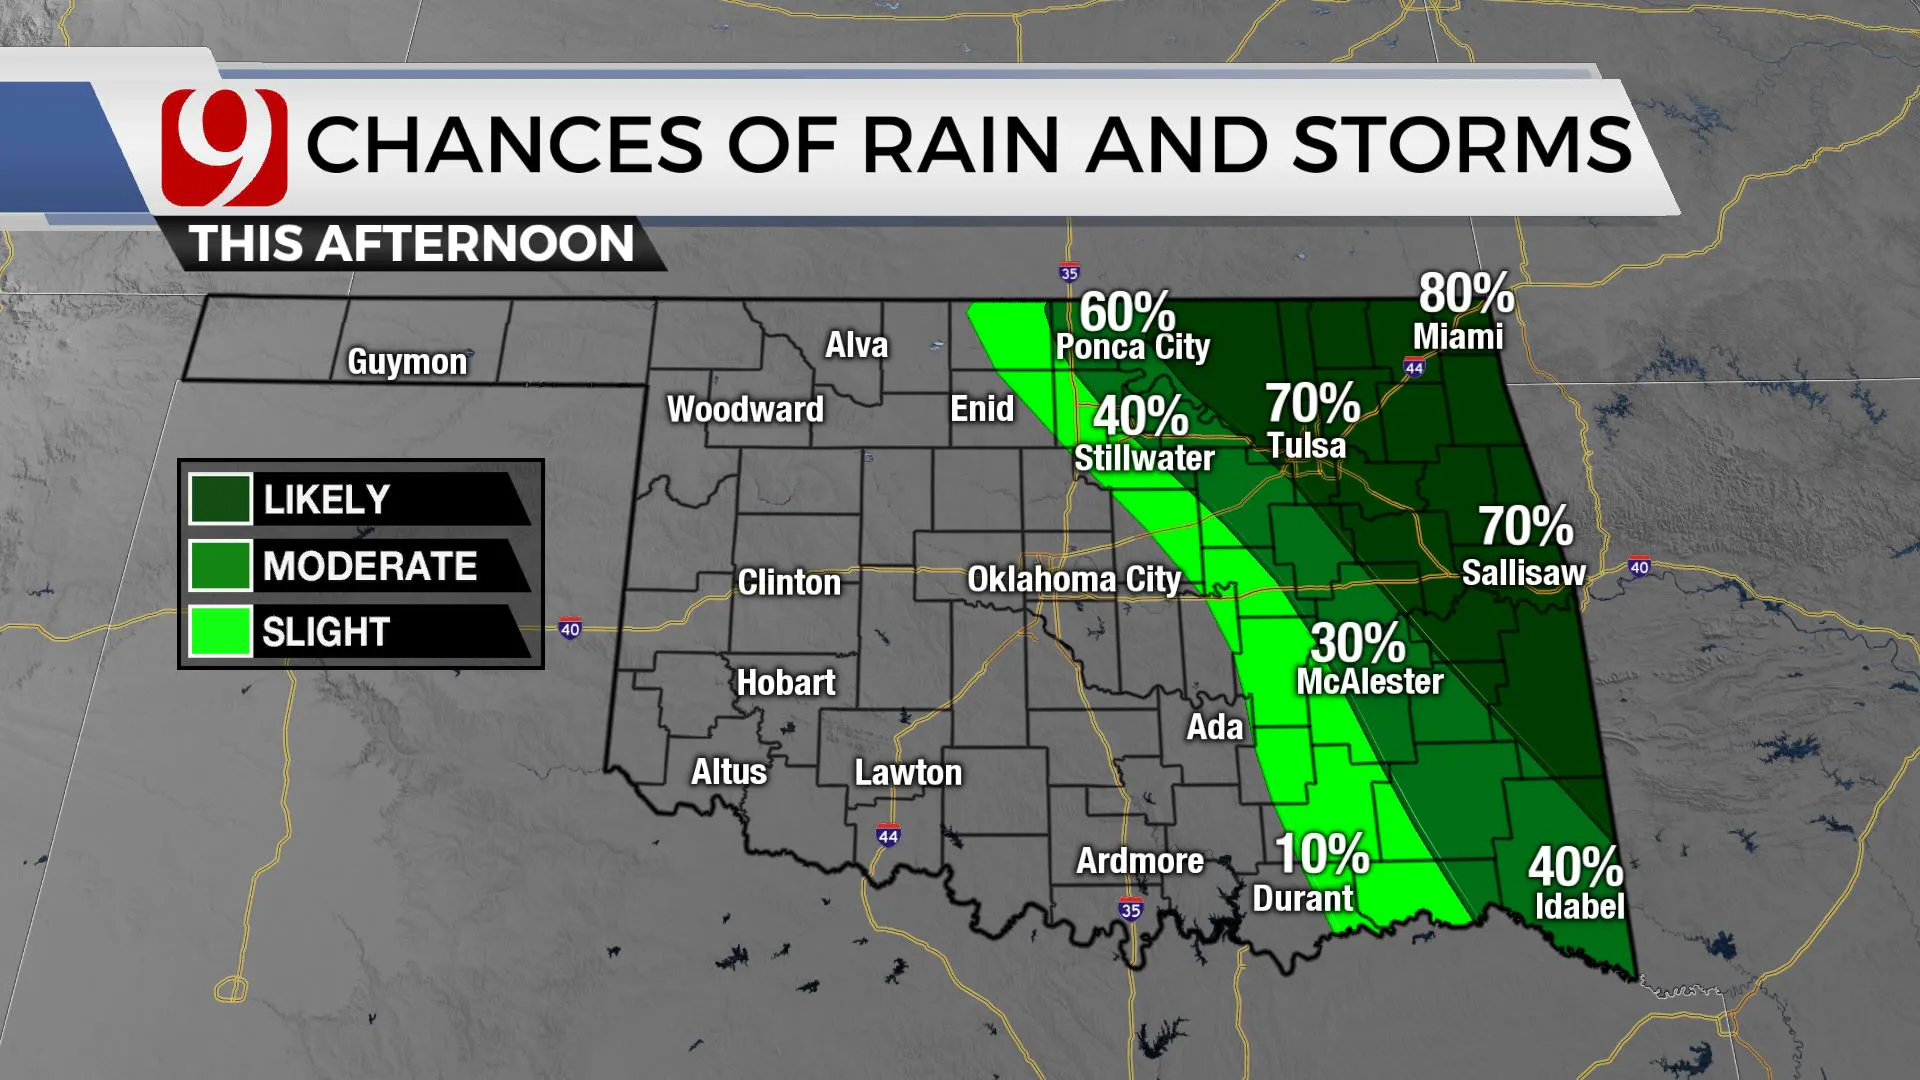 AFTERNOON CHANCE OF RAIN/STORMS